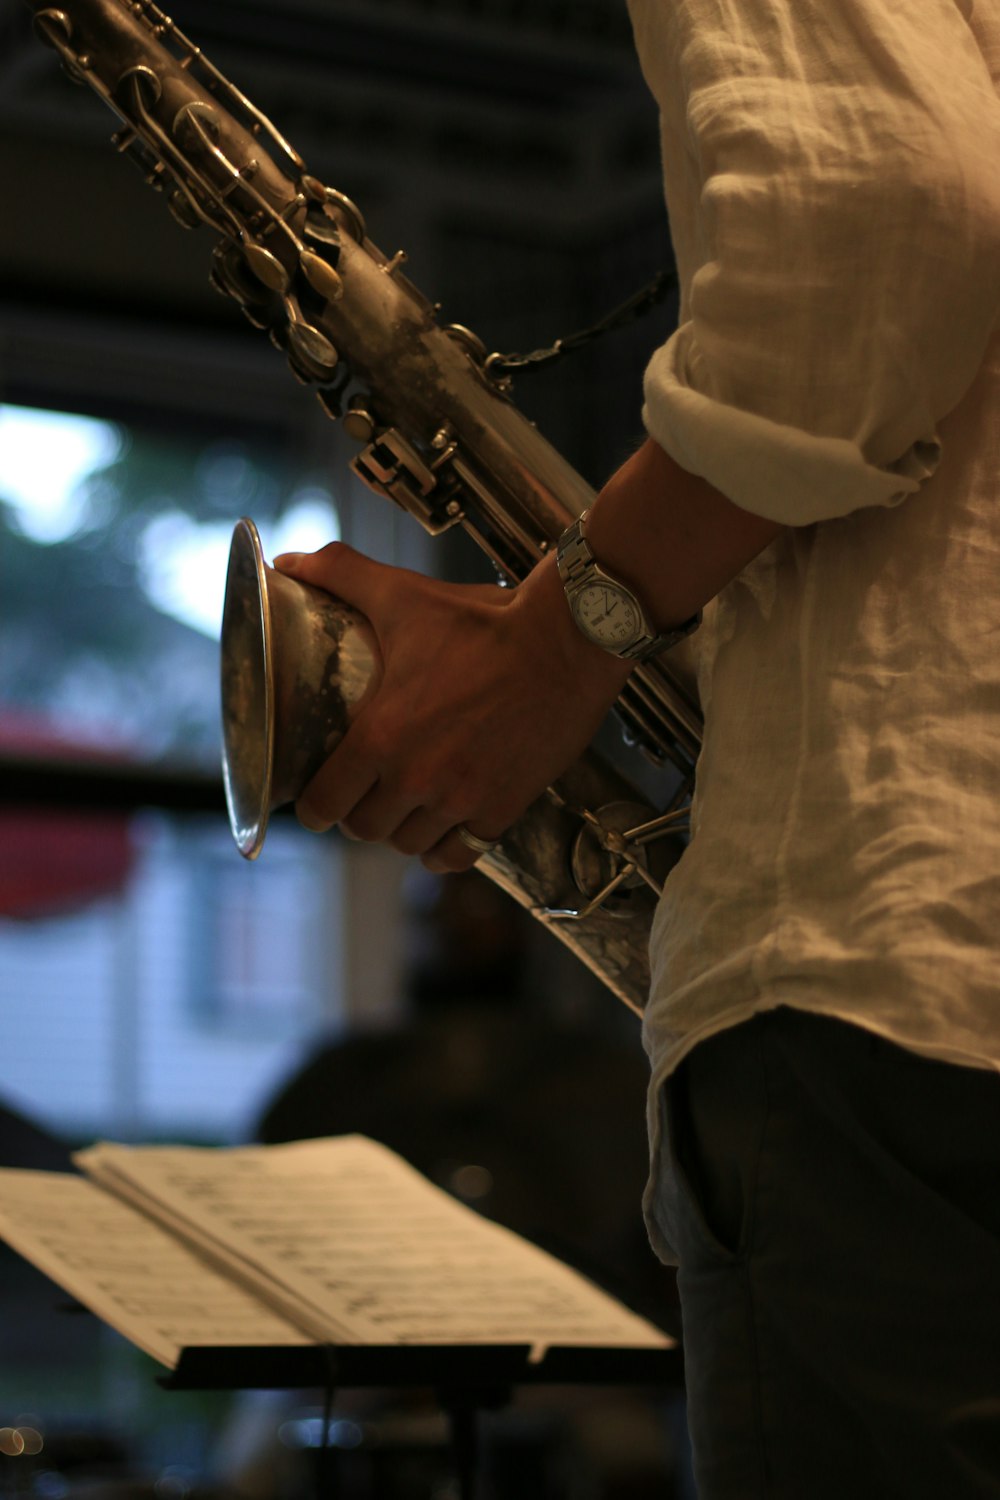 man in white dress shirt holding saxophone in front of music sheet on stand